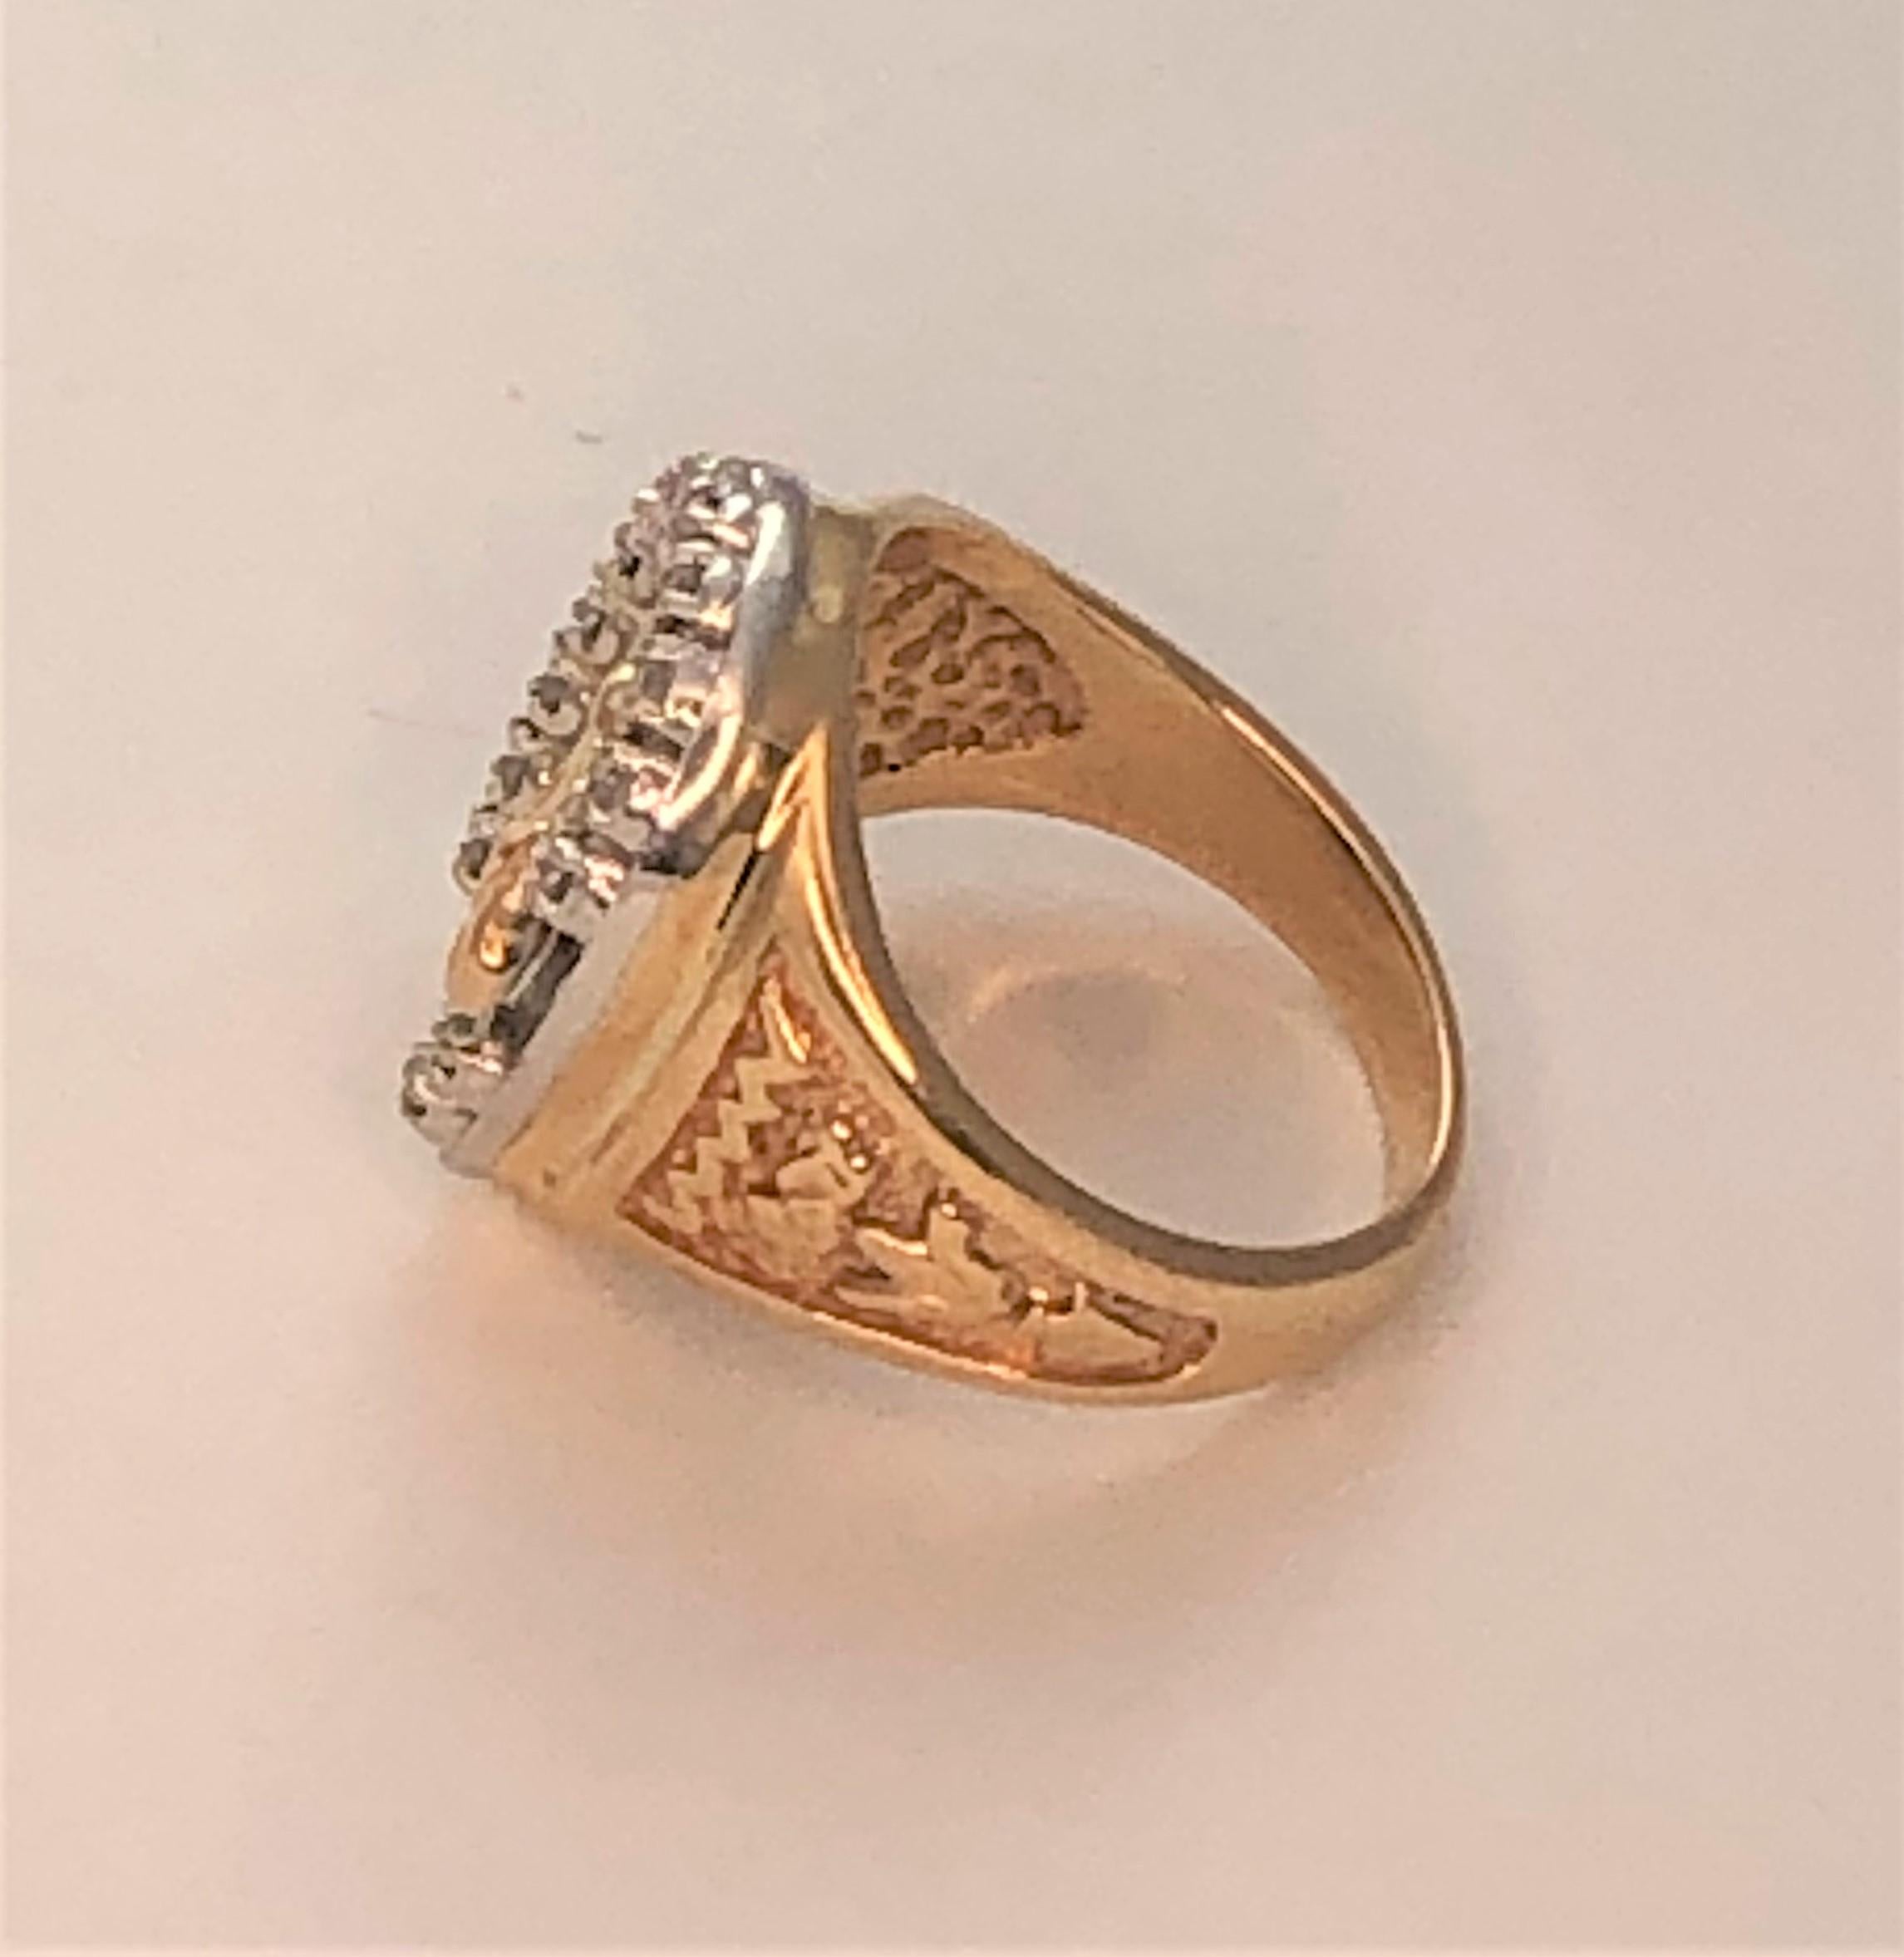 Cheers to loving horses!  This ring is an easy everyday item that will grab attention.
14 karat yellow gold horse ring with surrounding diamond horse shoe.
14 round, single cut diamonds on the horse shoe surrounding horse head in center.
Each